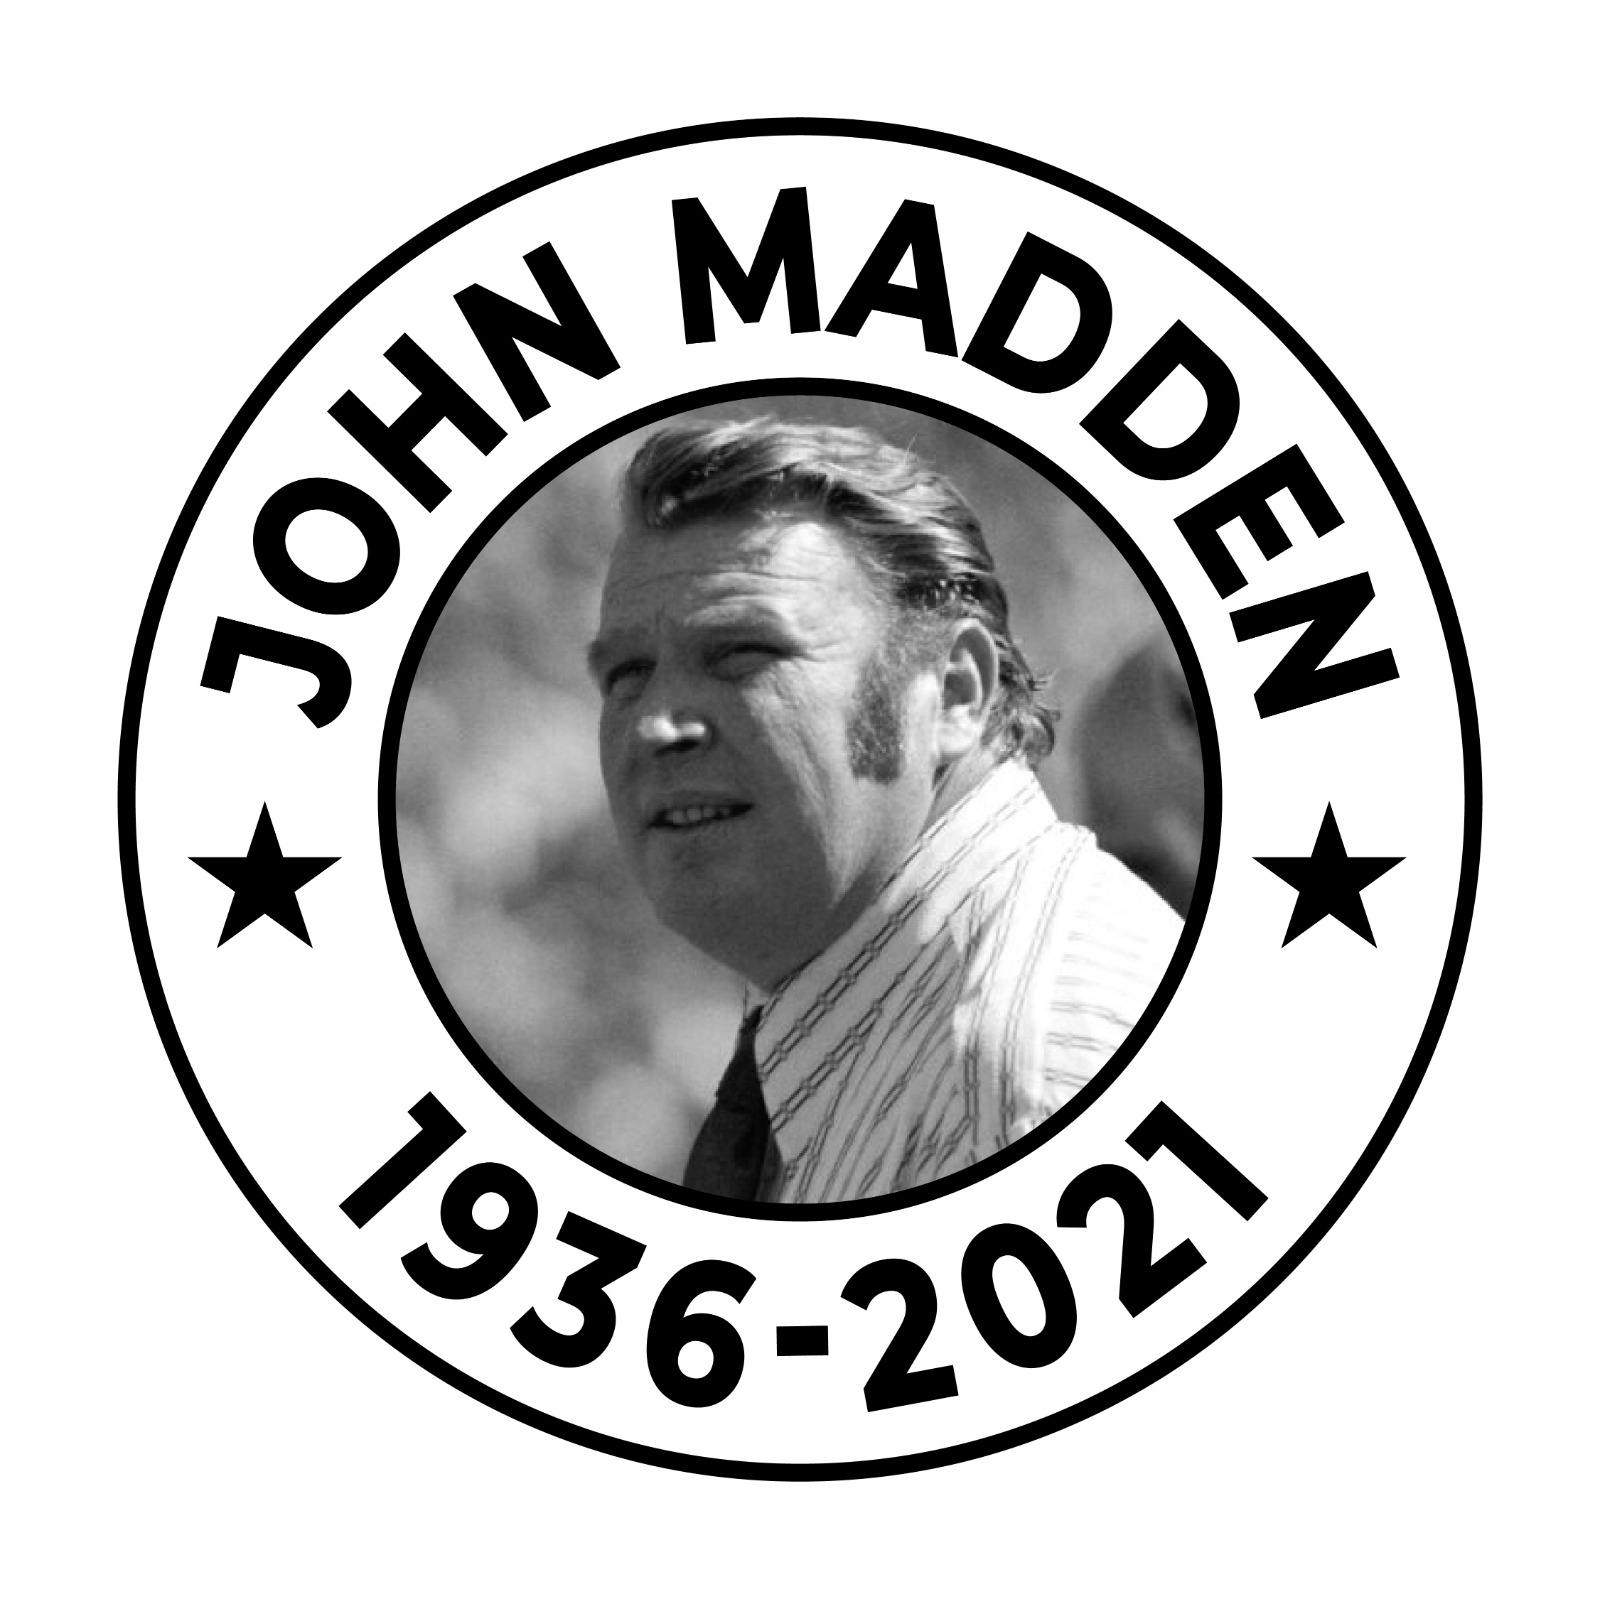 John Madden Fan Tribute Sticker Decal Perfect for laptops tumbler or car/truck